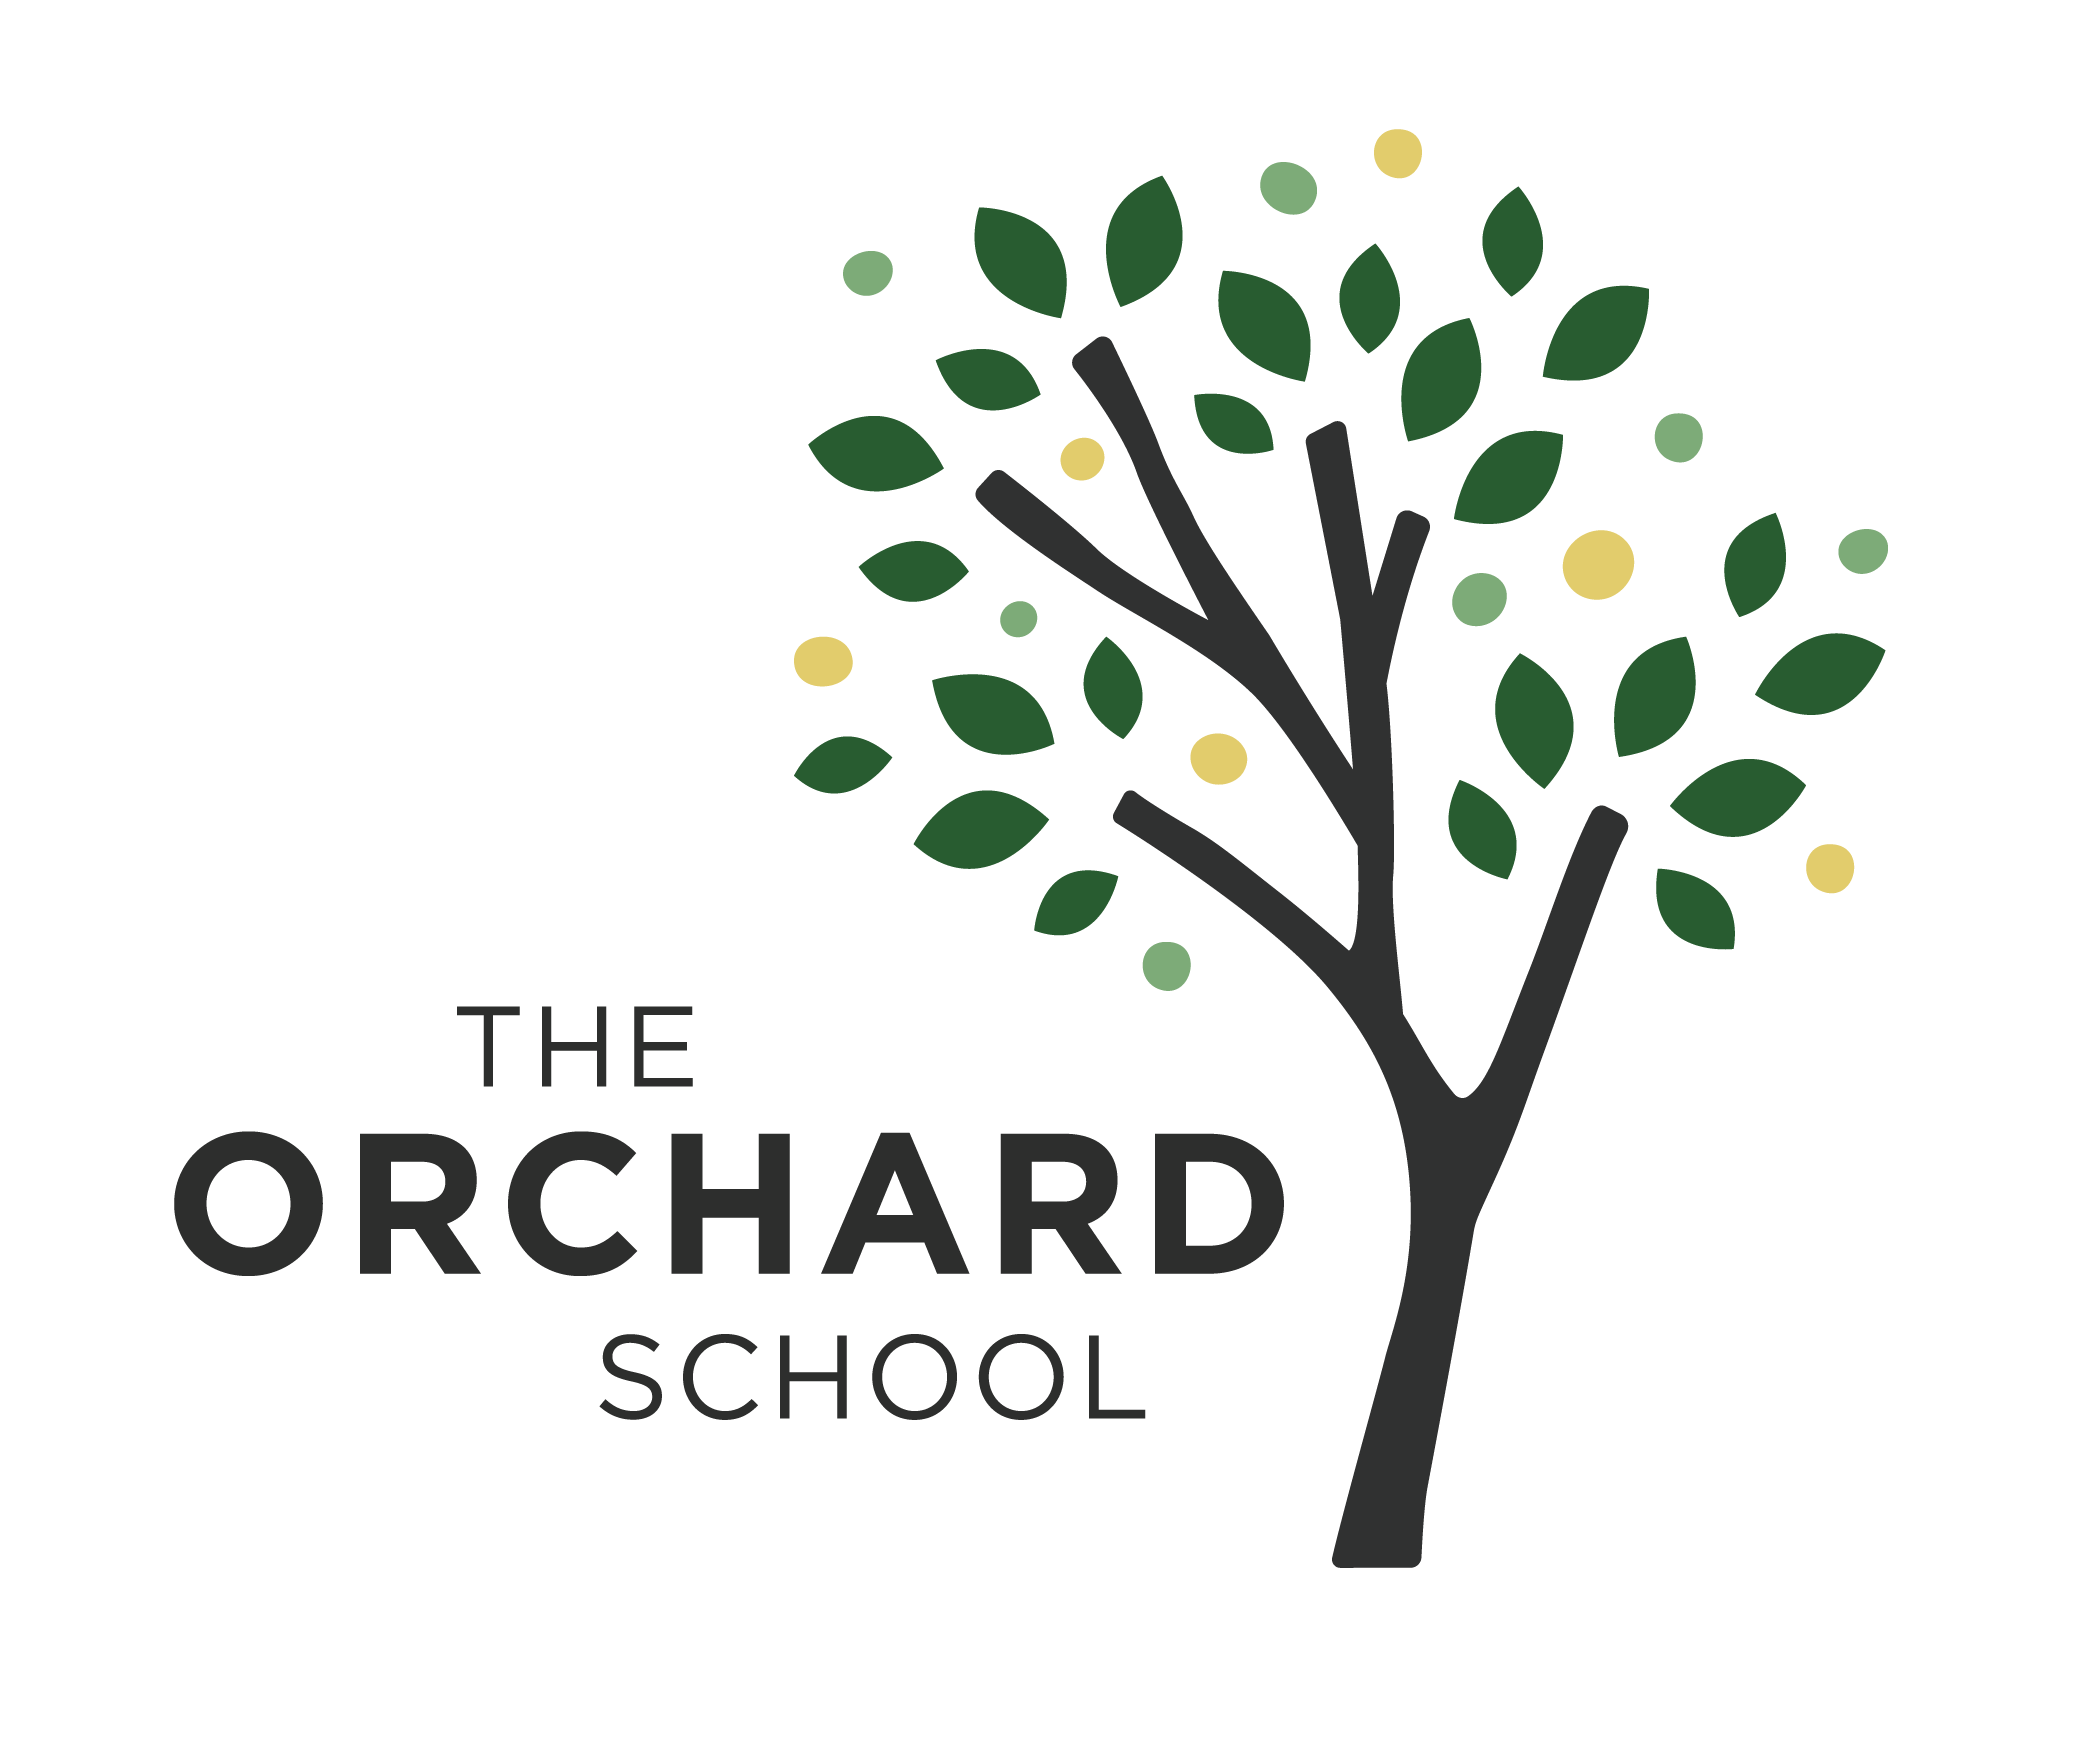 THE ORCHARD SCHOOLParents' Association